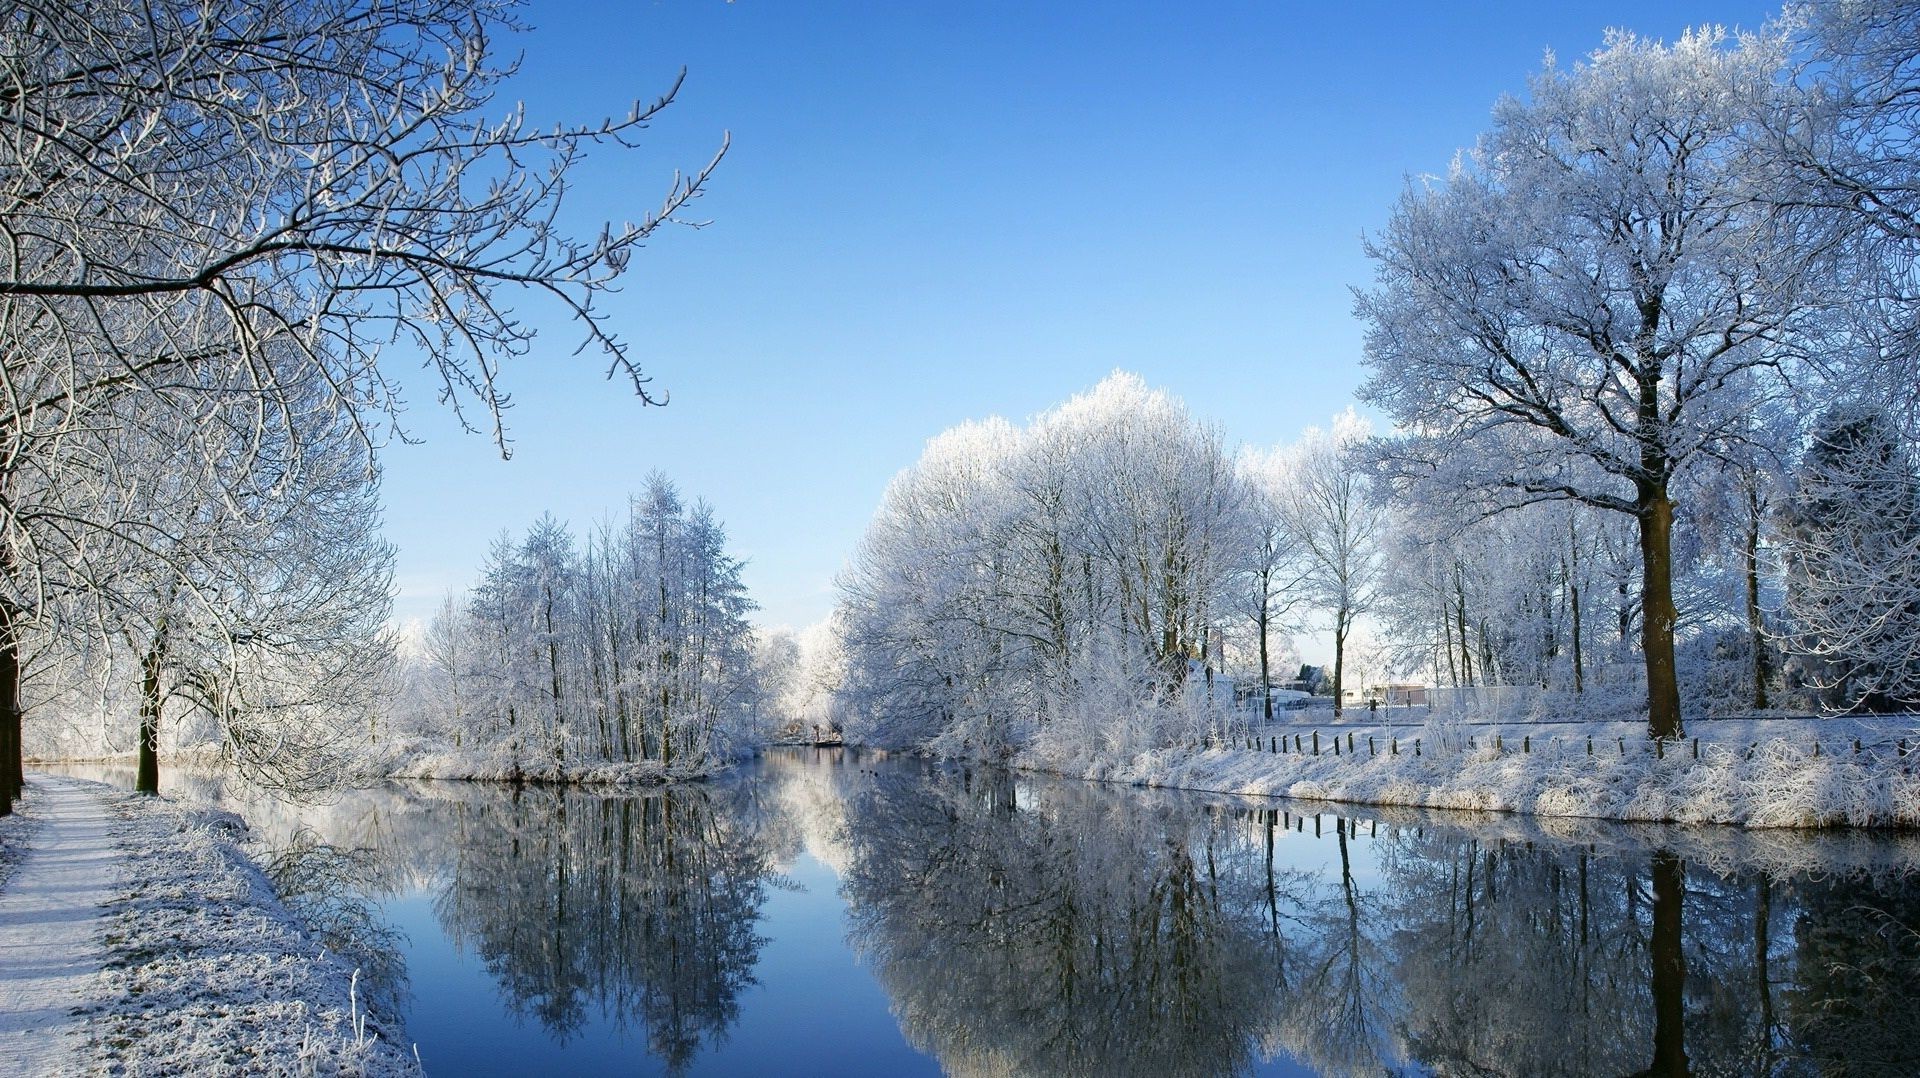 rivers ponds and streams winter snow cold tree frost season landscape wood frozen nature weather branch ice park scenic scene bright